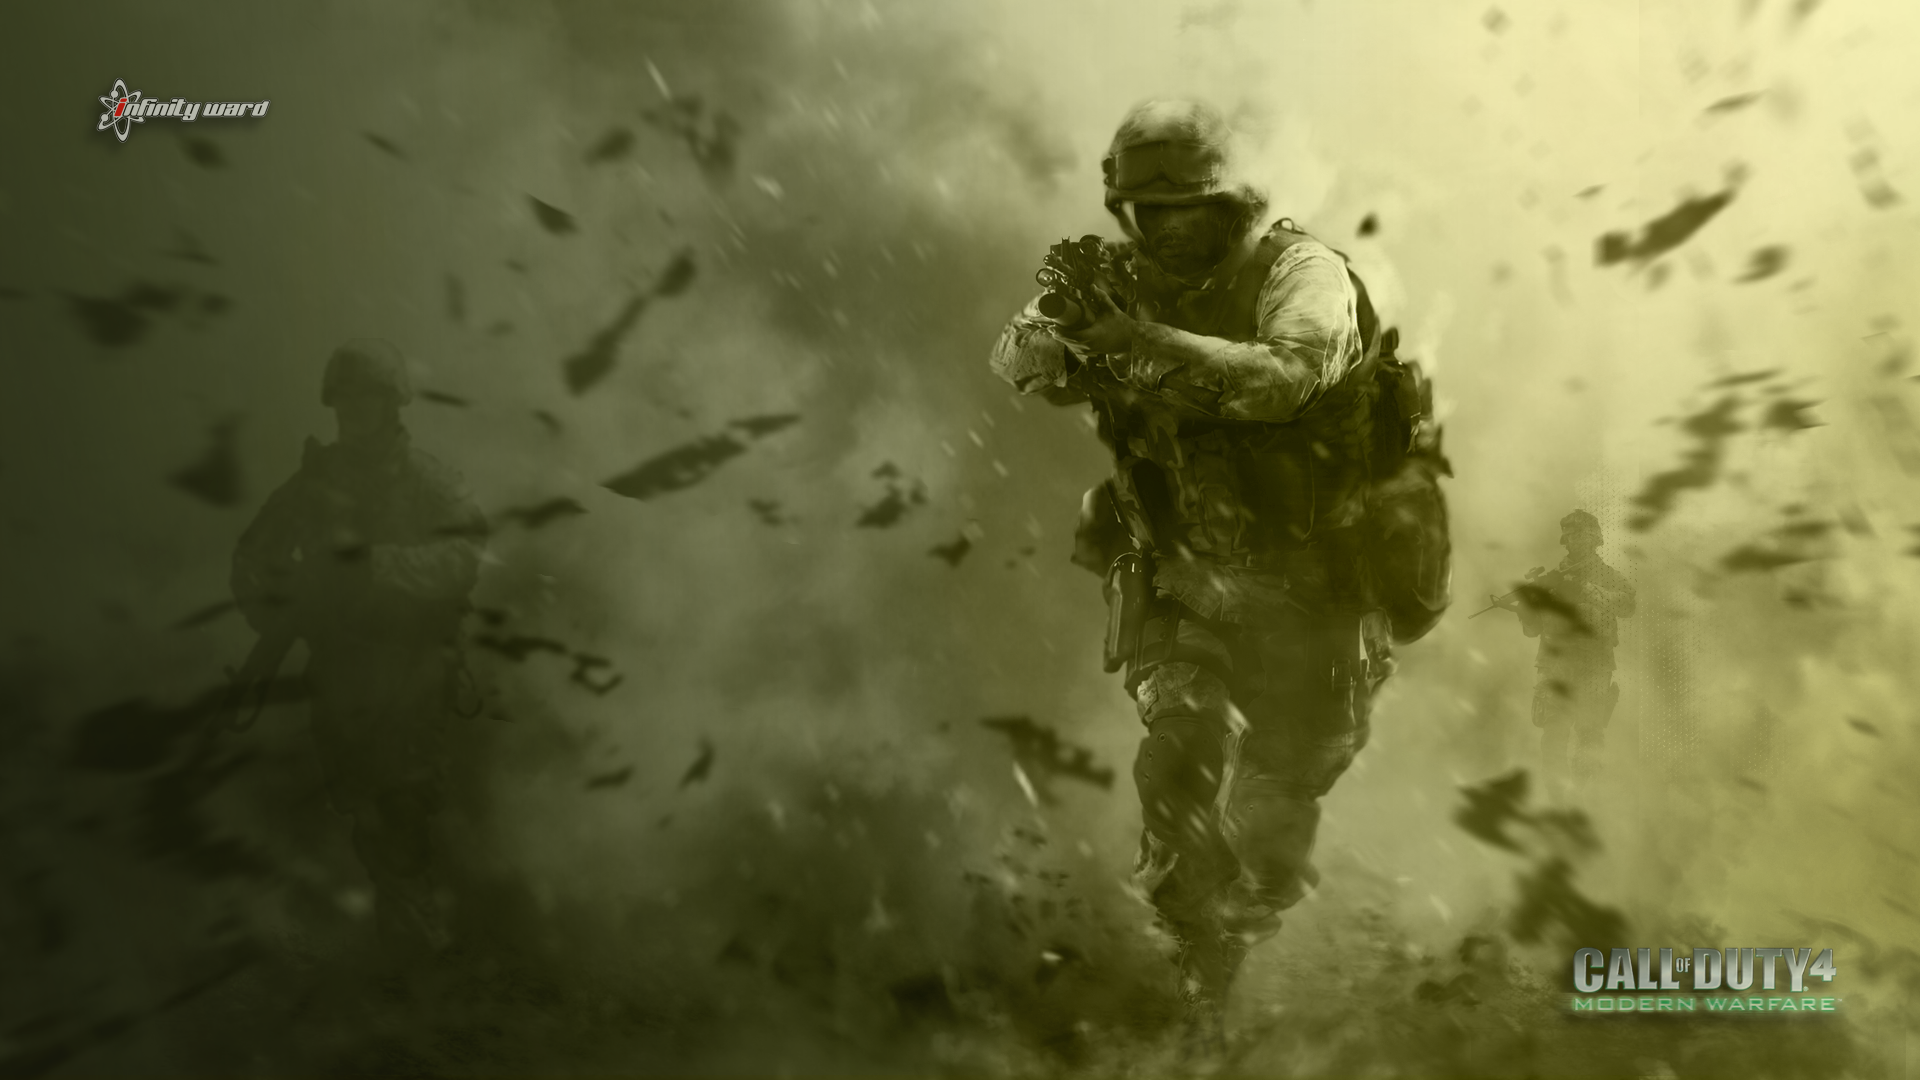 Call Of Duty Modern Warfare HD Wallpaper And Background Image